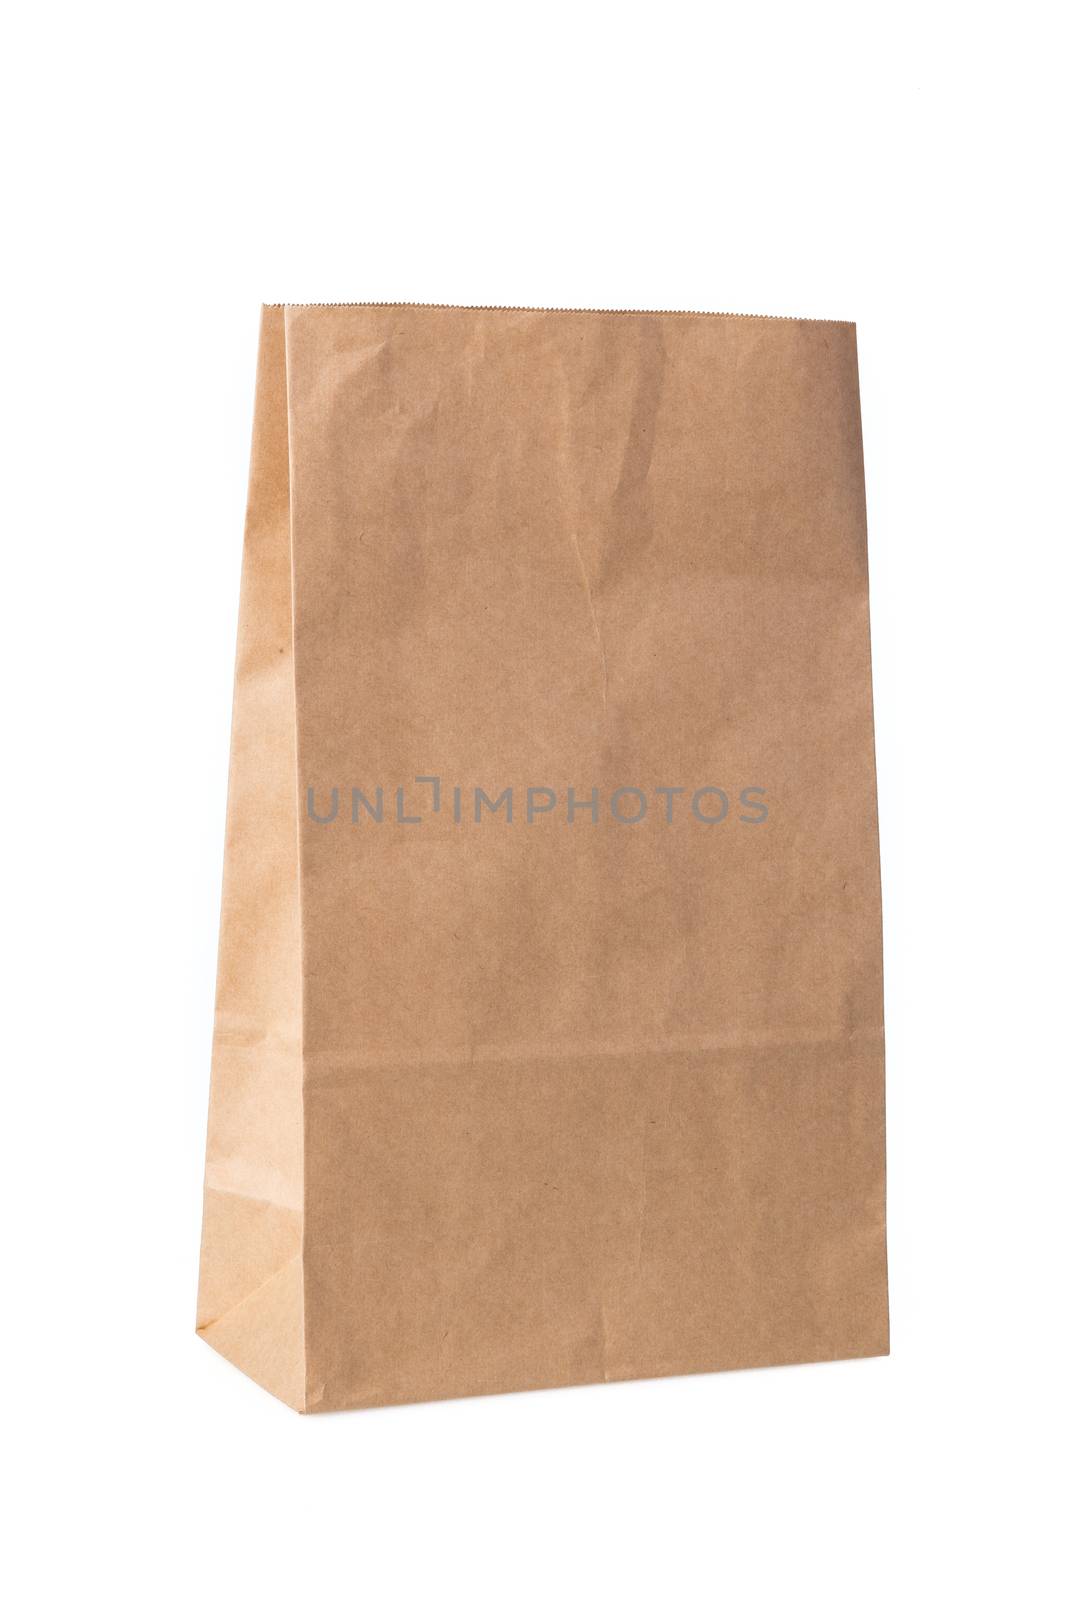 brown paper bag isolated on white background